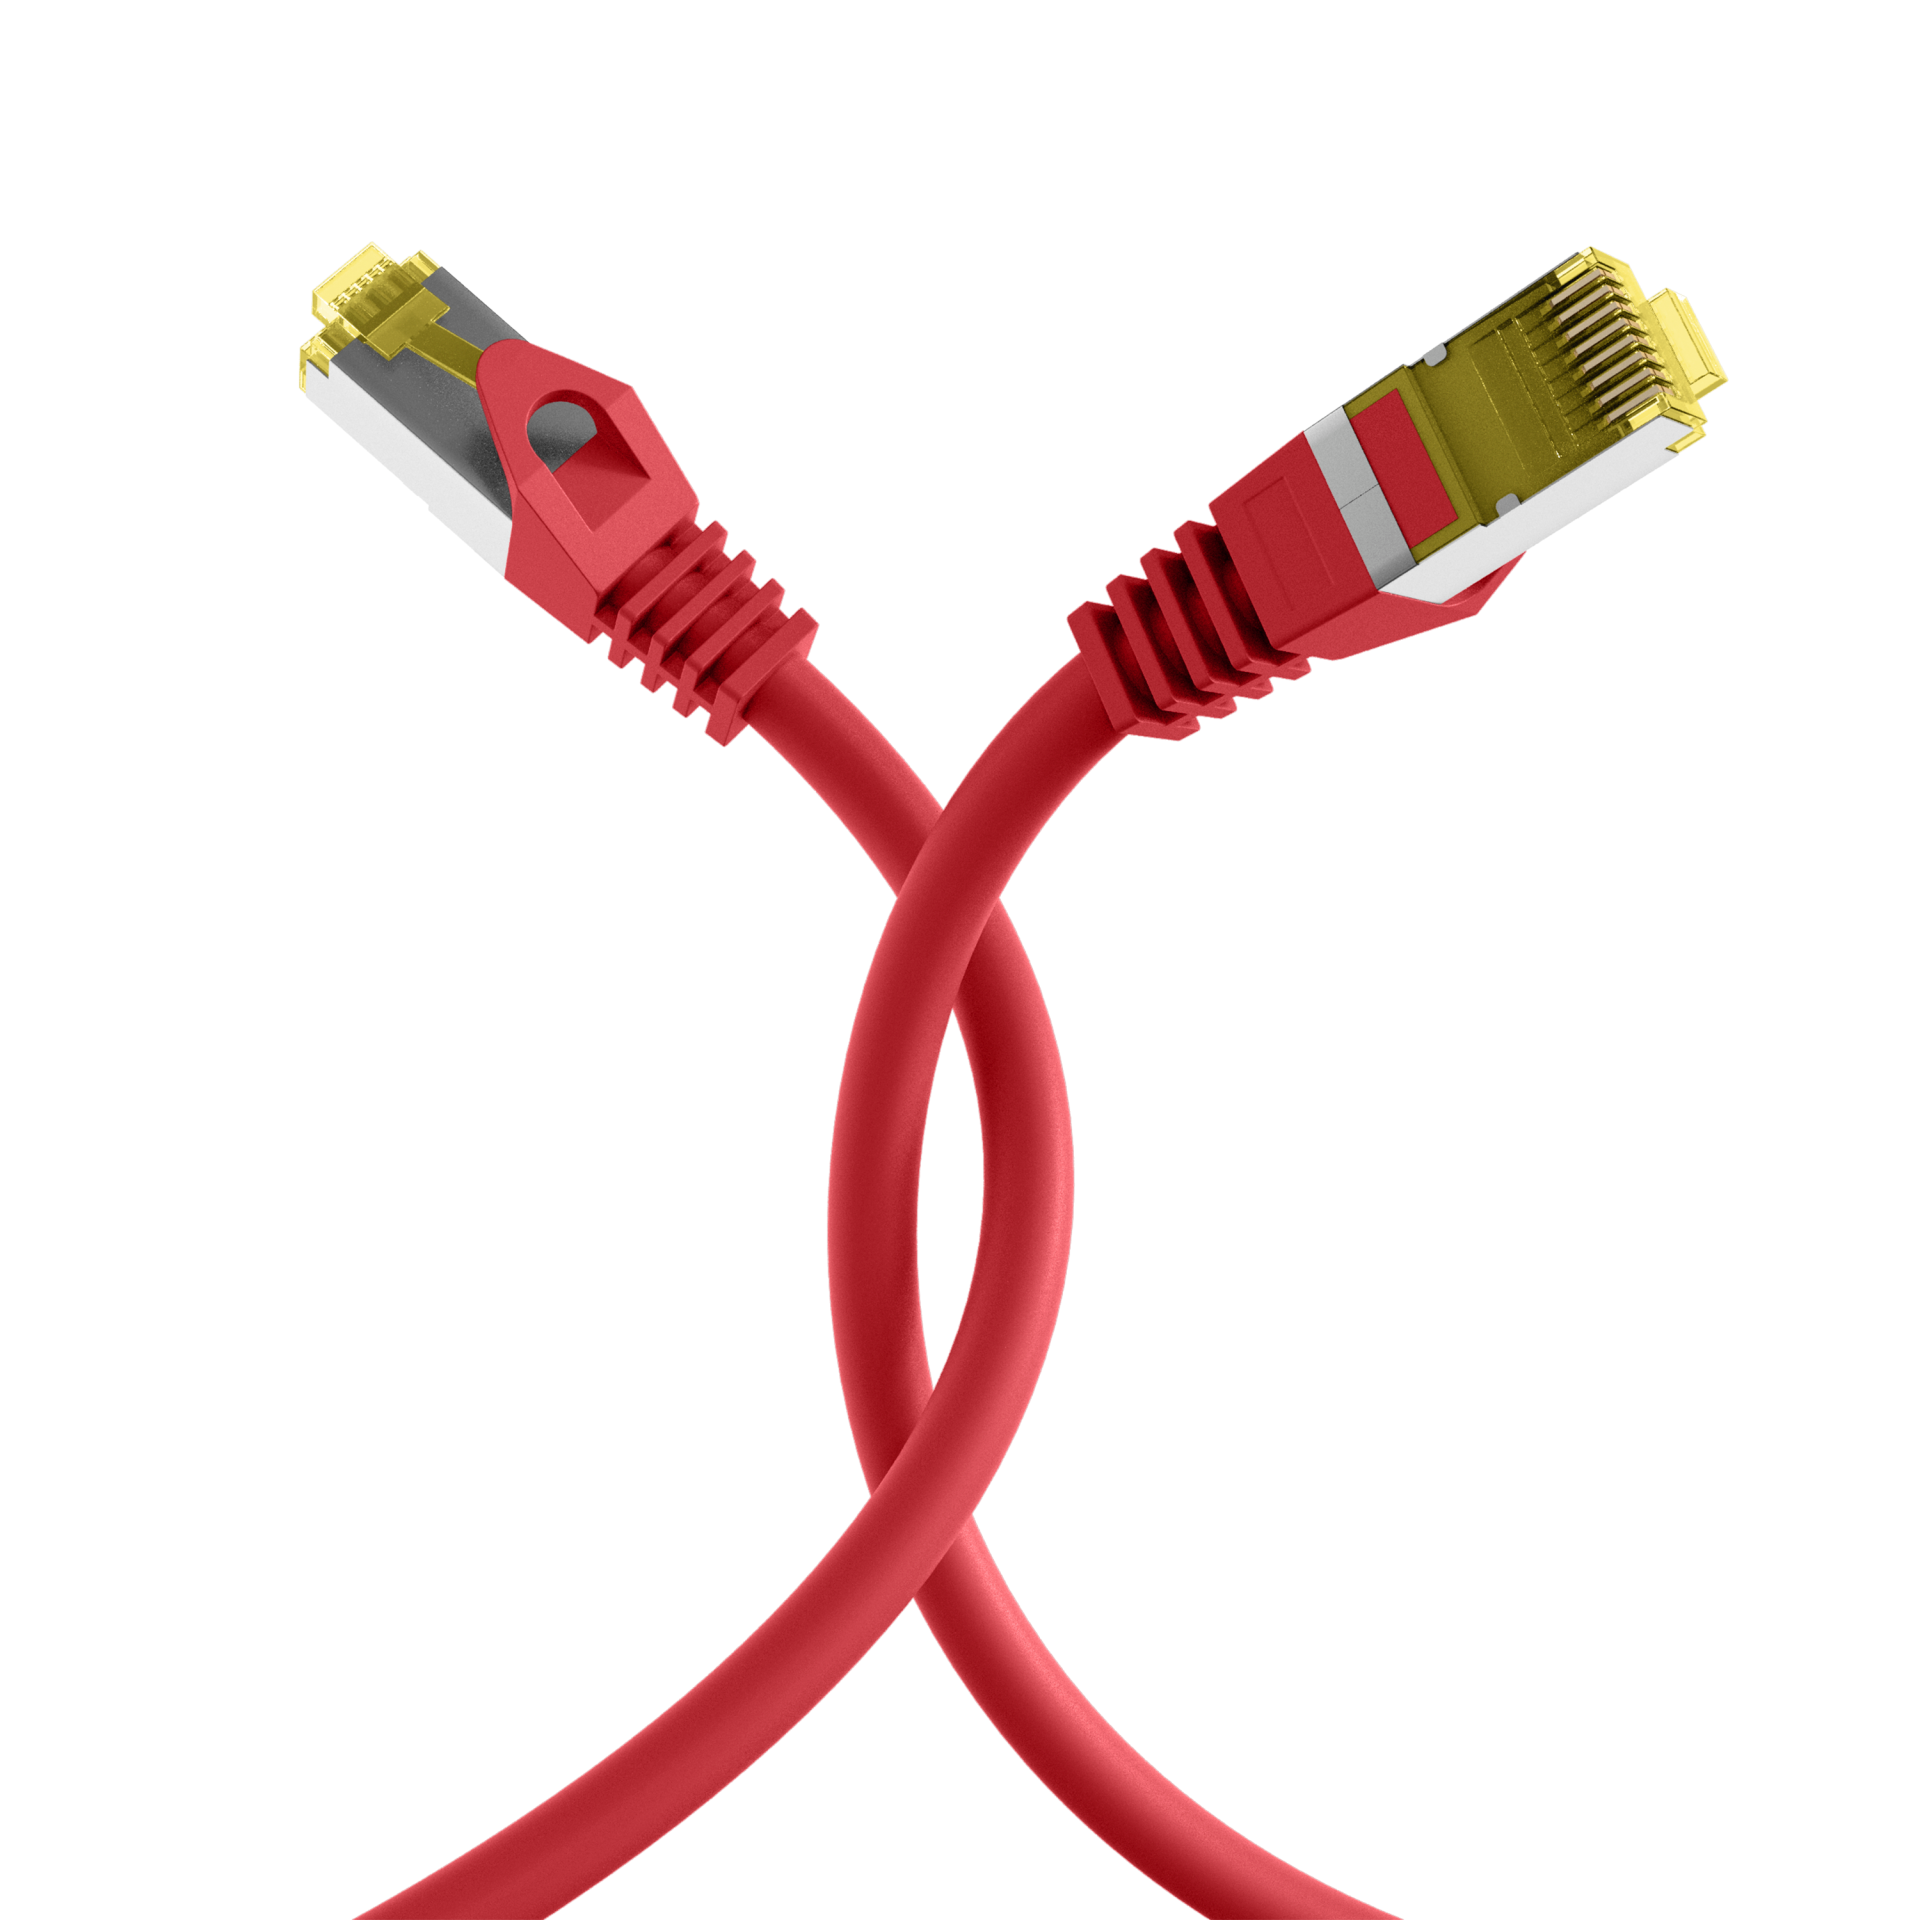 RJ45 Patch Cord Cat.6A S/FTP LSZH Cat.7 raw cable red 7,5m